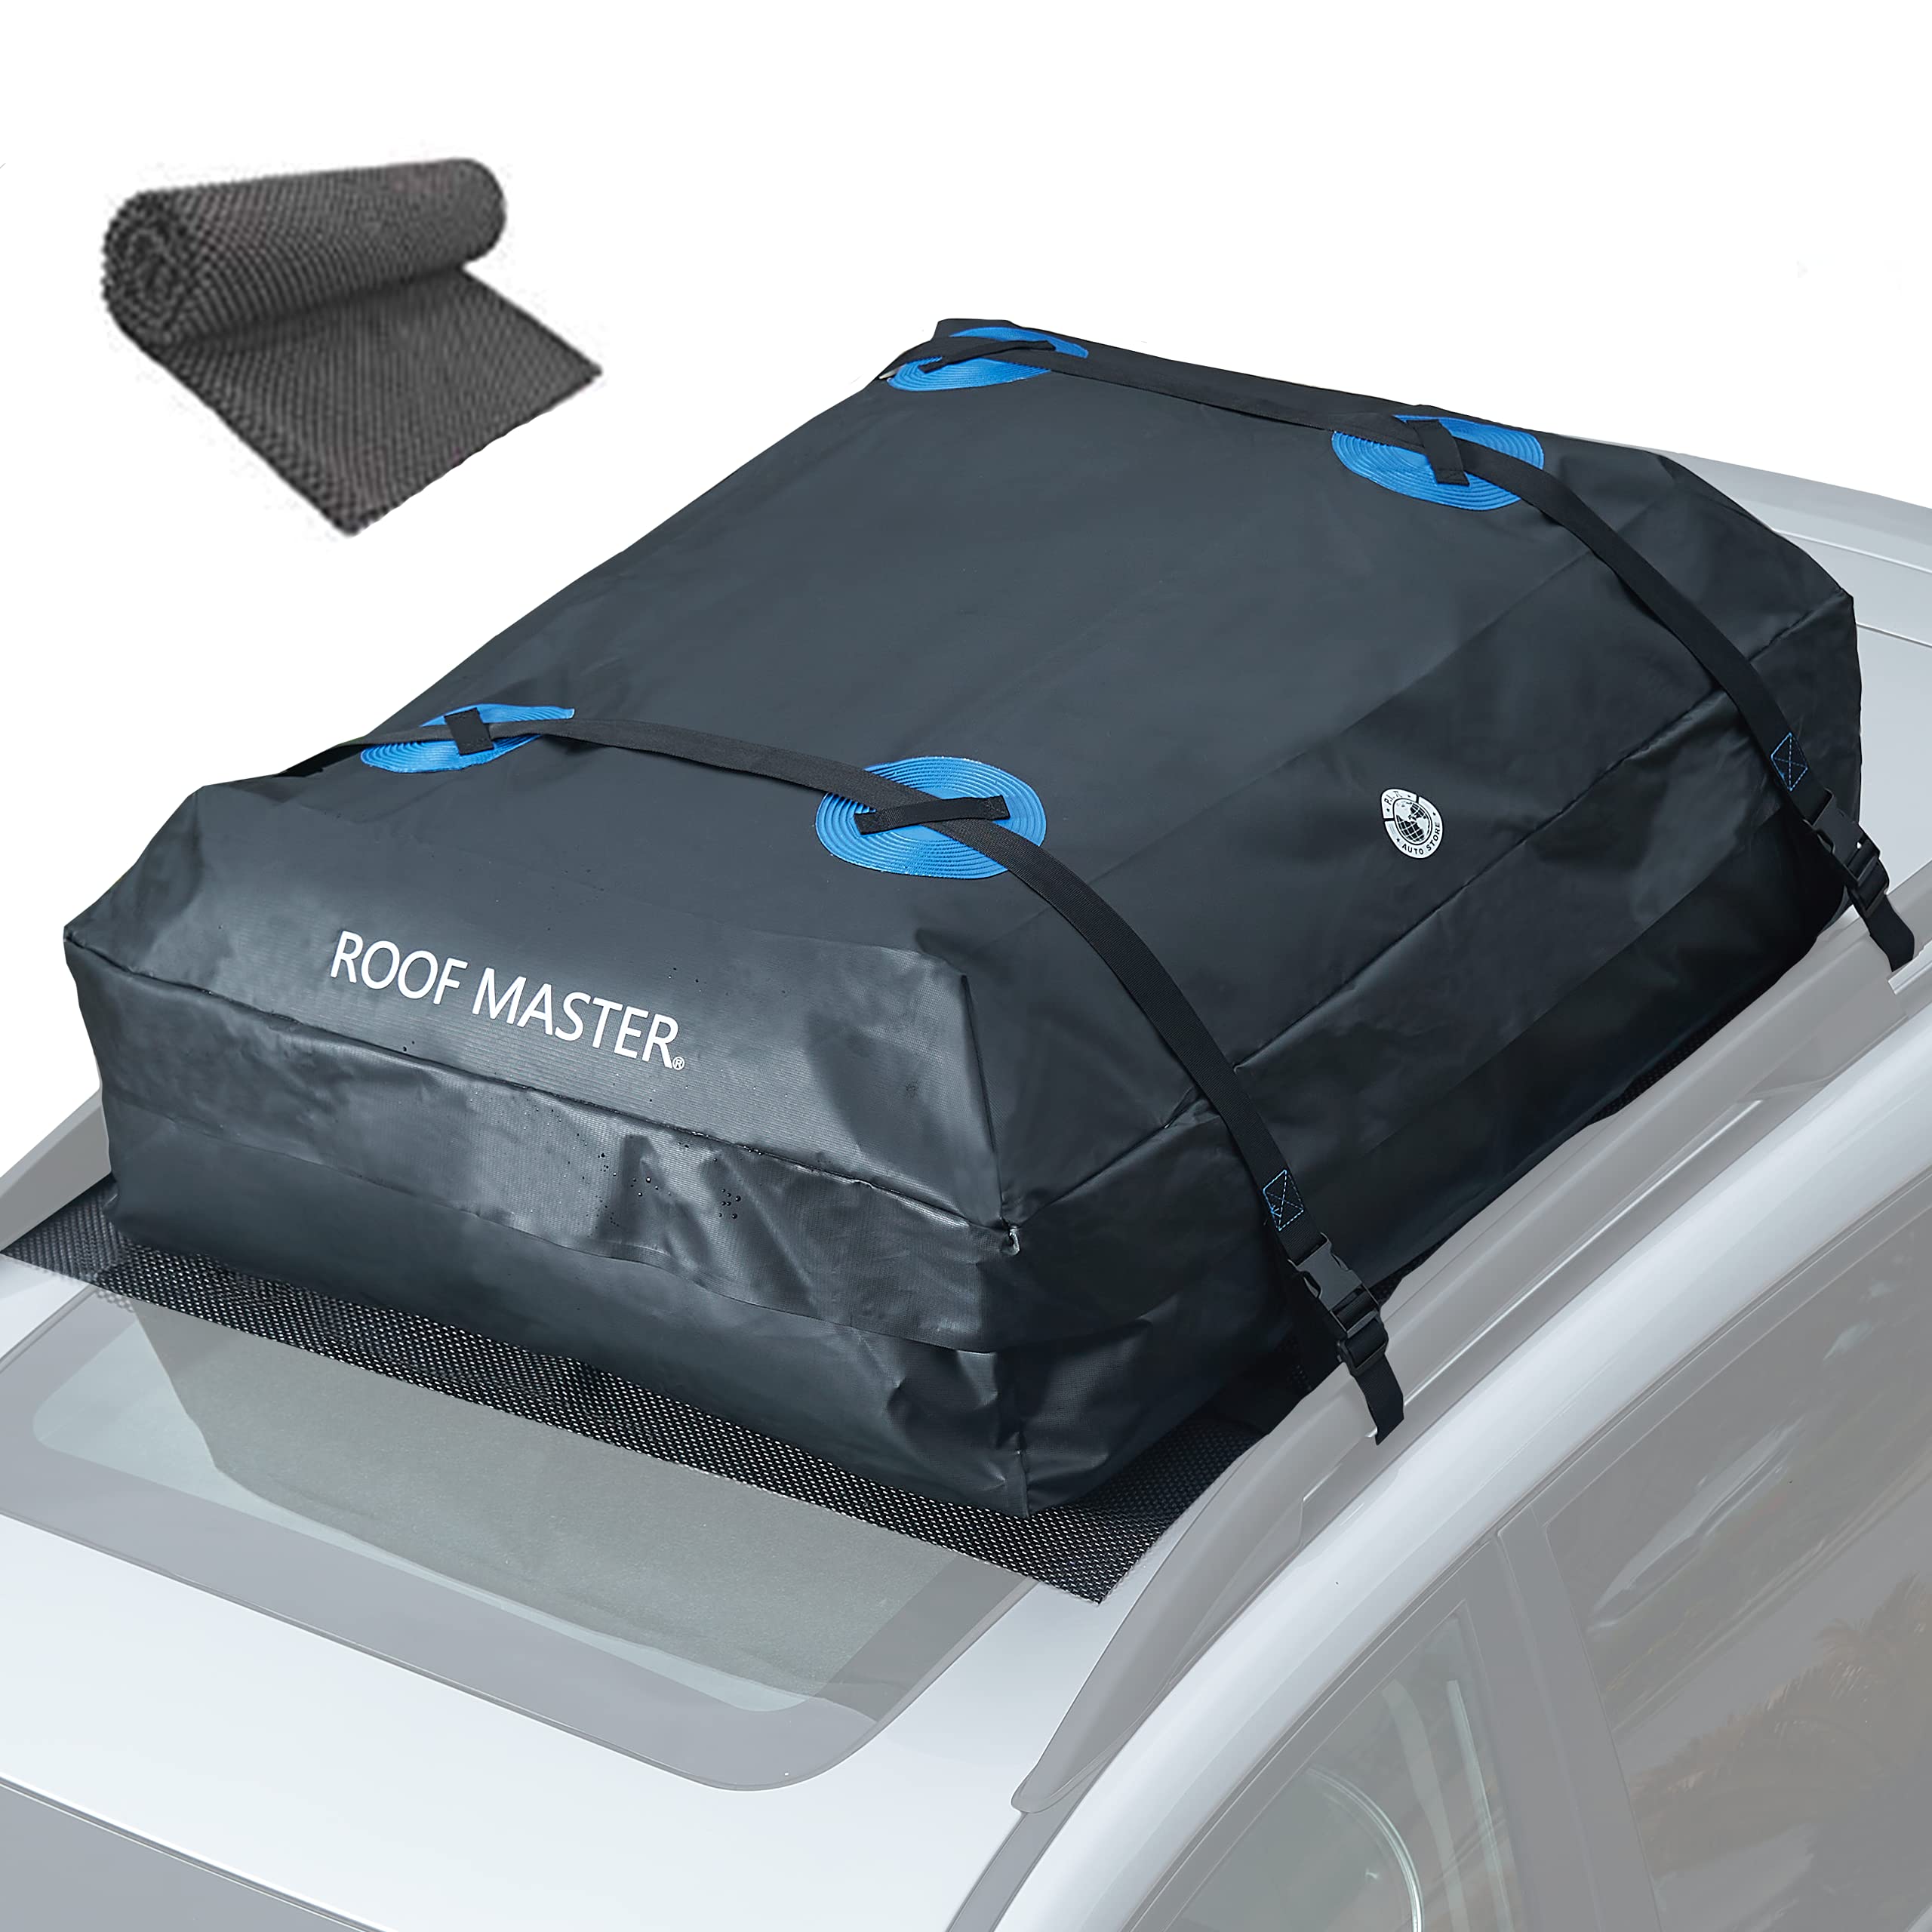 Rooftop Cargo Carrier, PI Store Waterproof Car Roof Bag with Protective Mat, Extra 16 Cubic Foot Storage Carriers for All Cars with/Without Roof Racks, Gift for Men $19.99